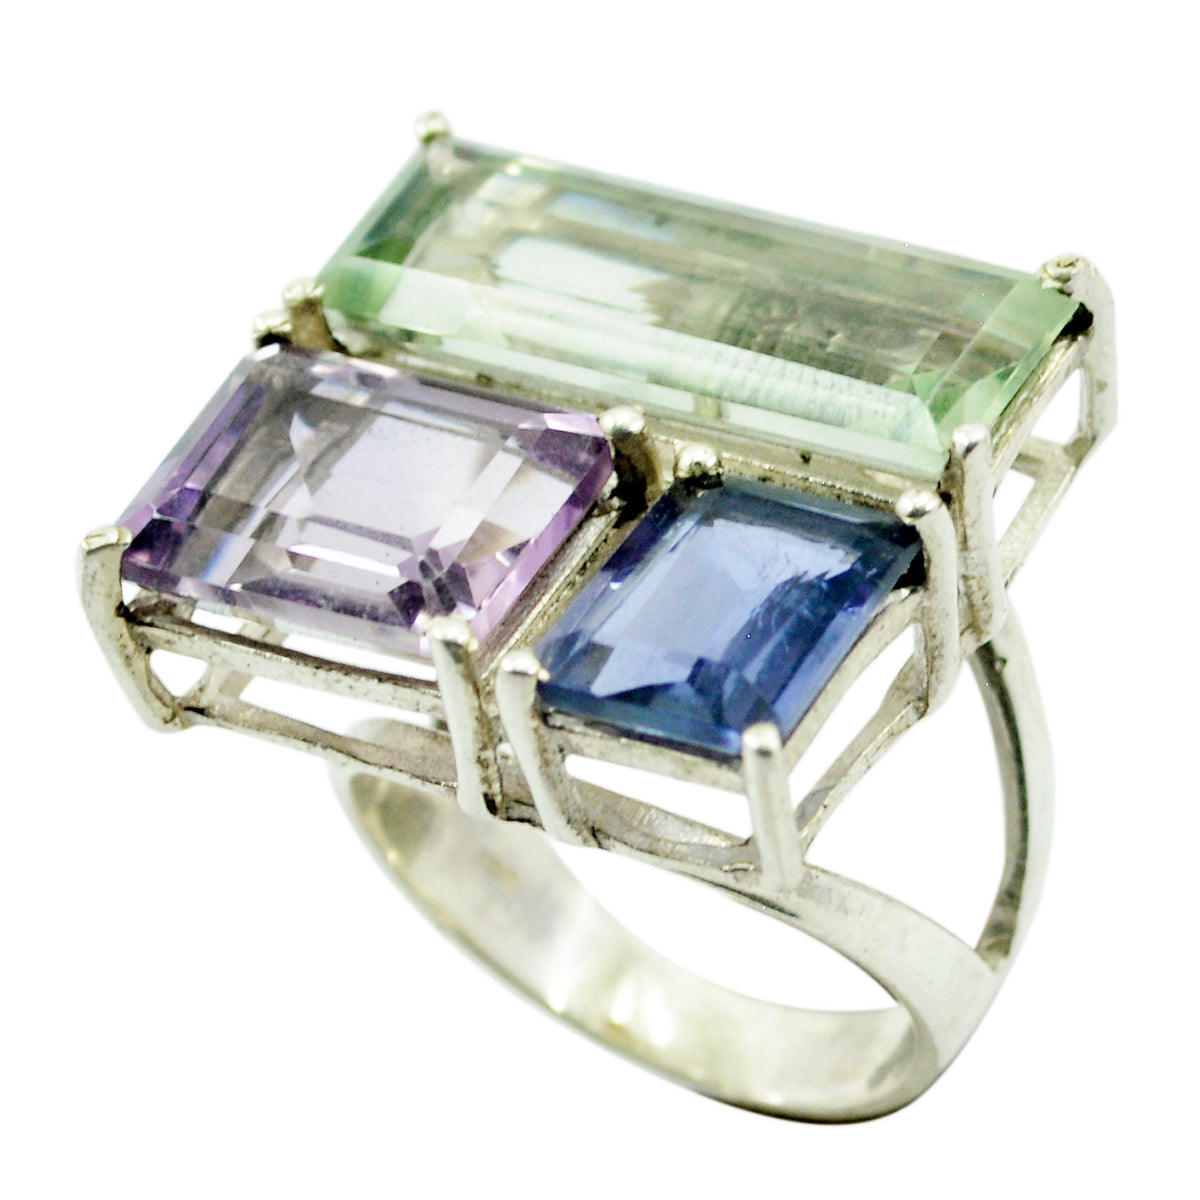 Mesmeric Gemstones Multi Stone Sterling Silver Rings Boot Jewelry